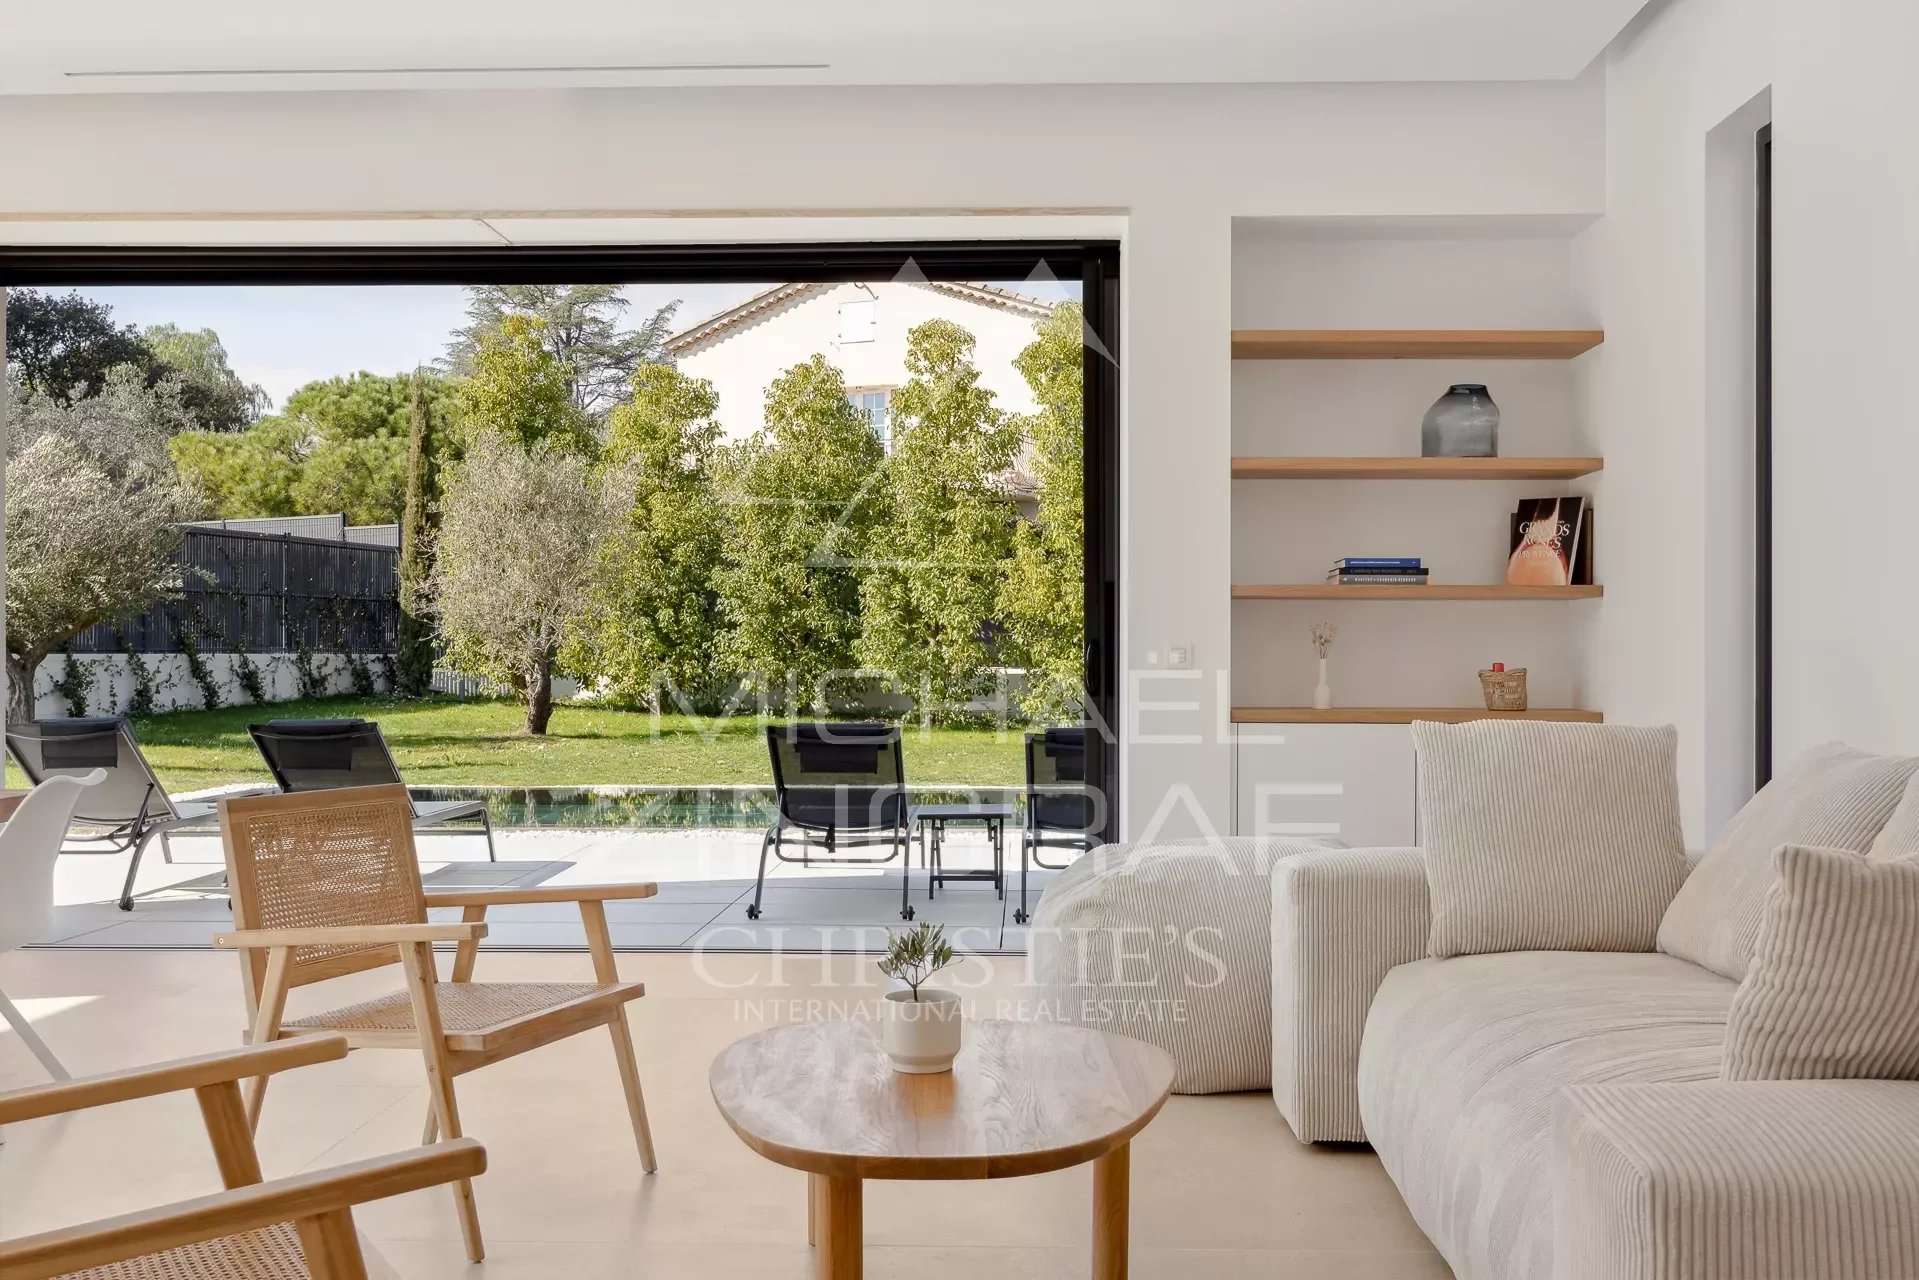 Mougins - close to the old village - Brand new contemporary villa - 5 bedrooms